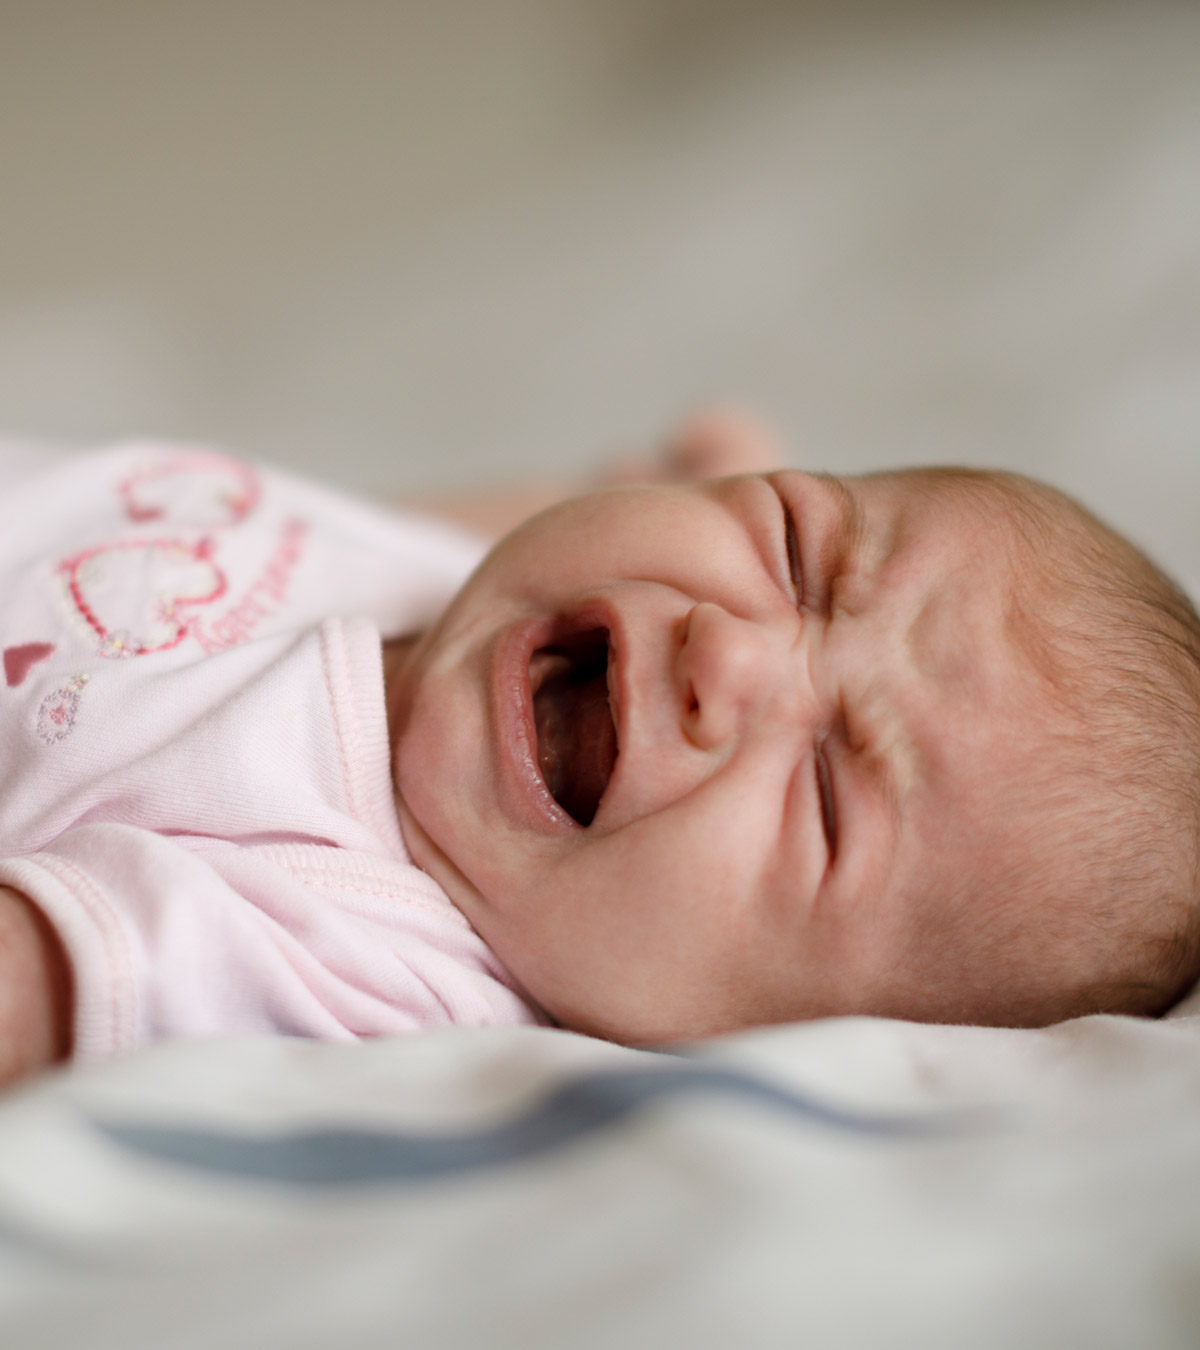 7 Causes of Baby's Hoarse Voice, Treatment And Home Remedies